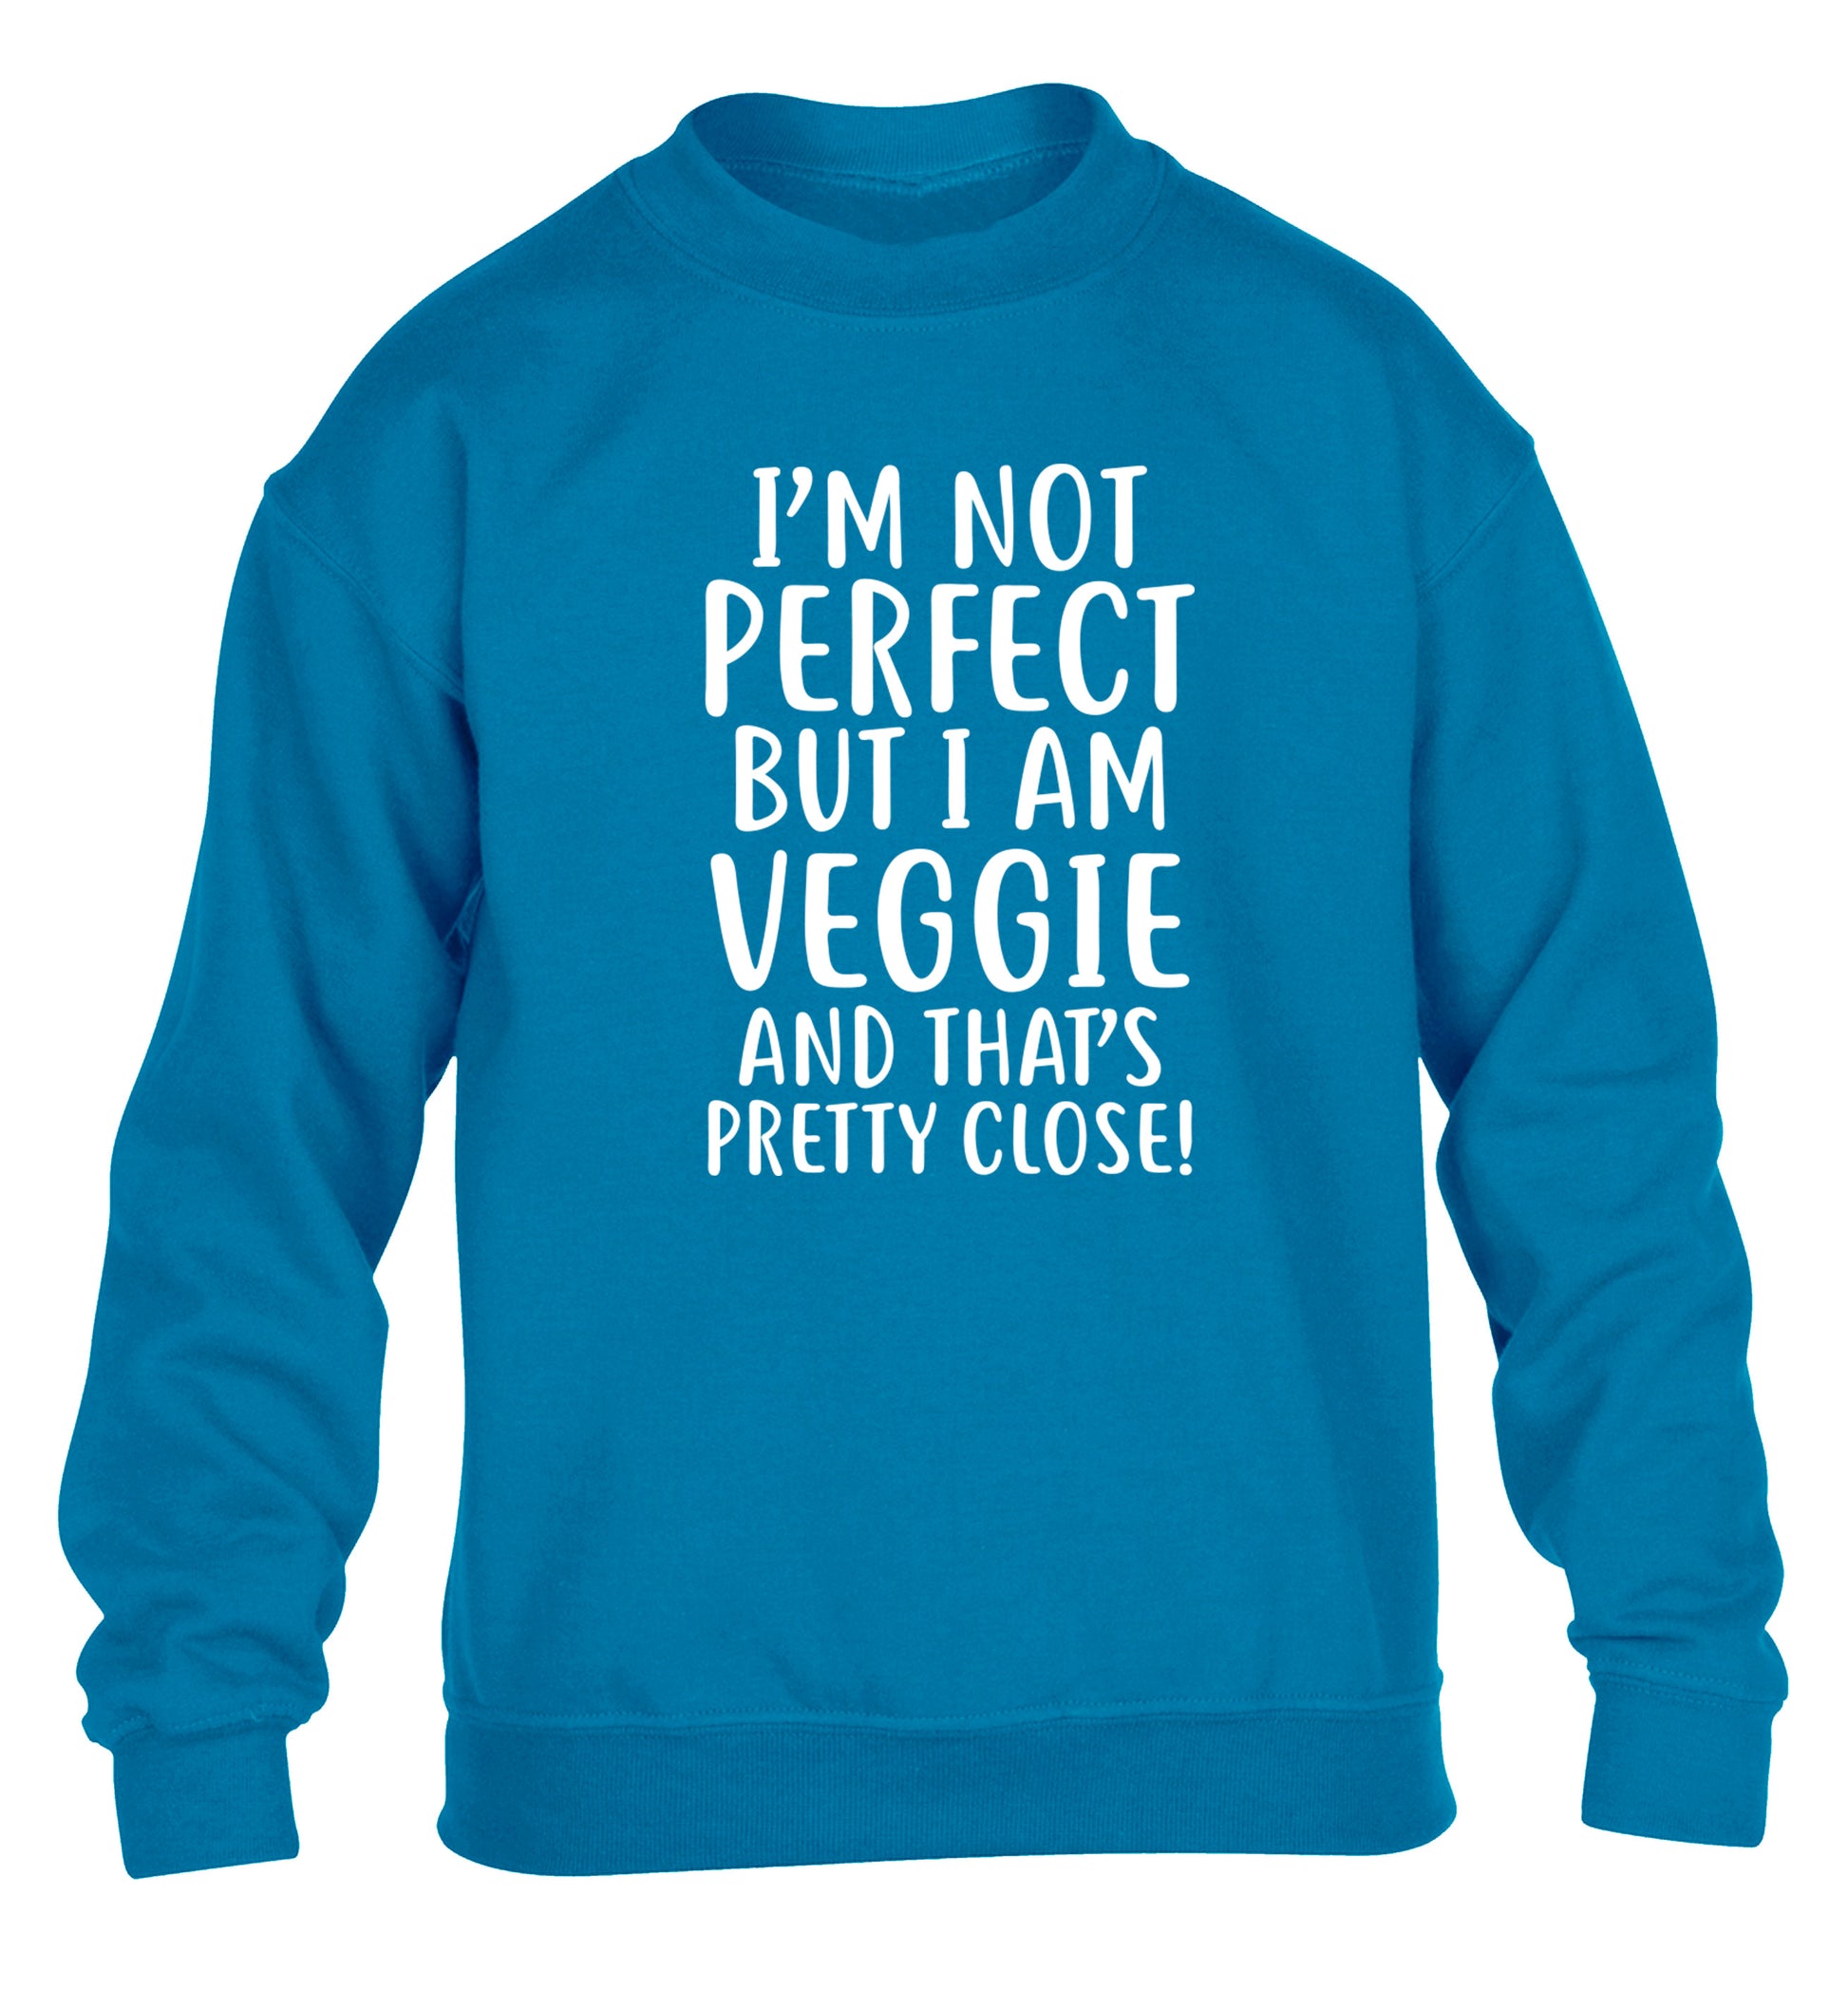 Might not be perfect but I am veggie children's blue sweater 12-13 Years